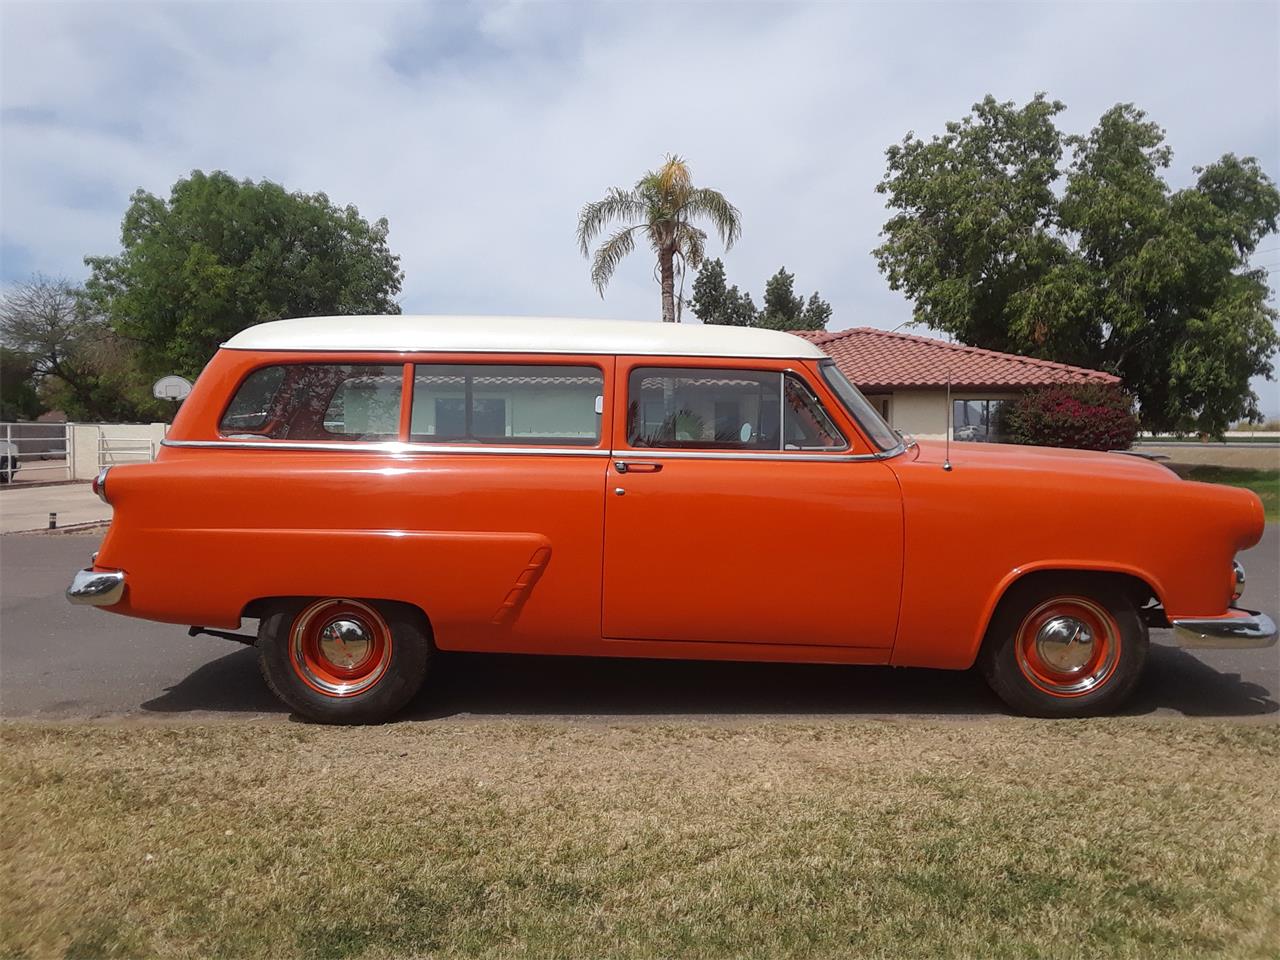 Tangerine Pearl 1952 Ford Ranch Wagon for sale located in Mesa, Arizona - $...